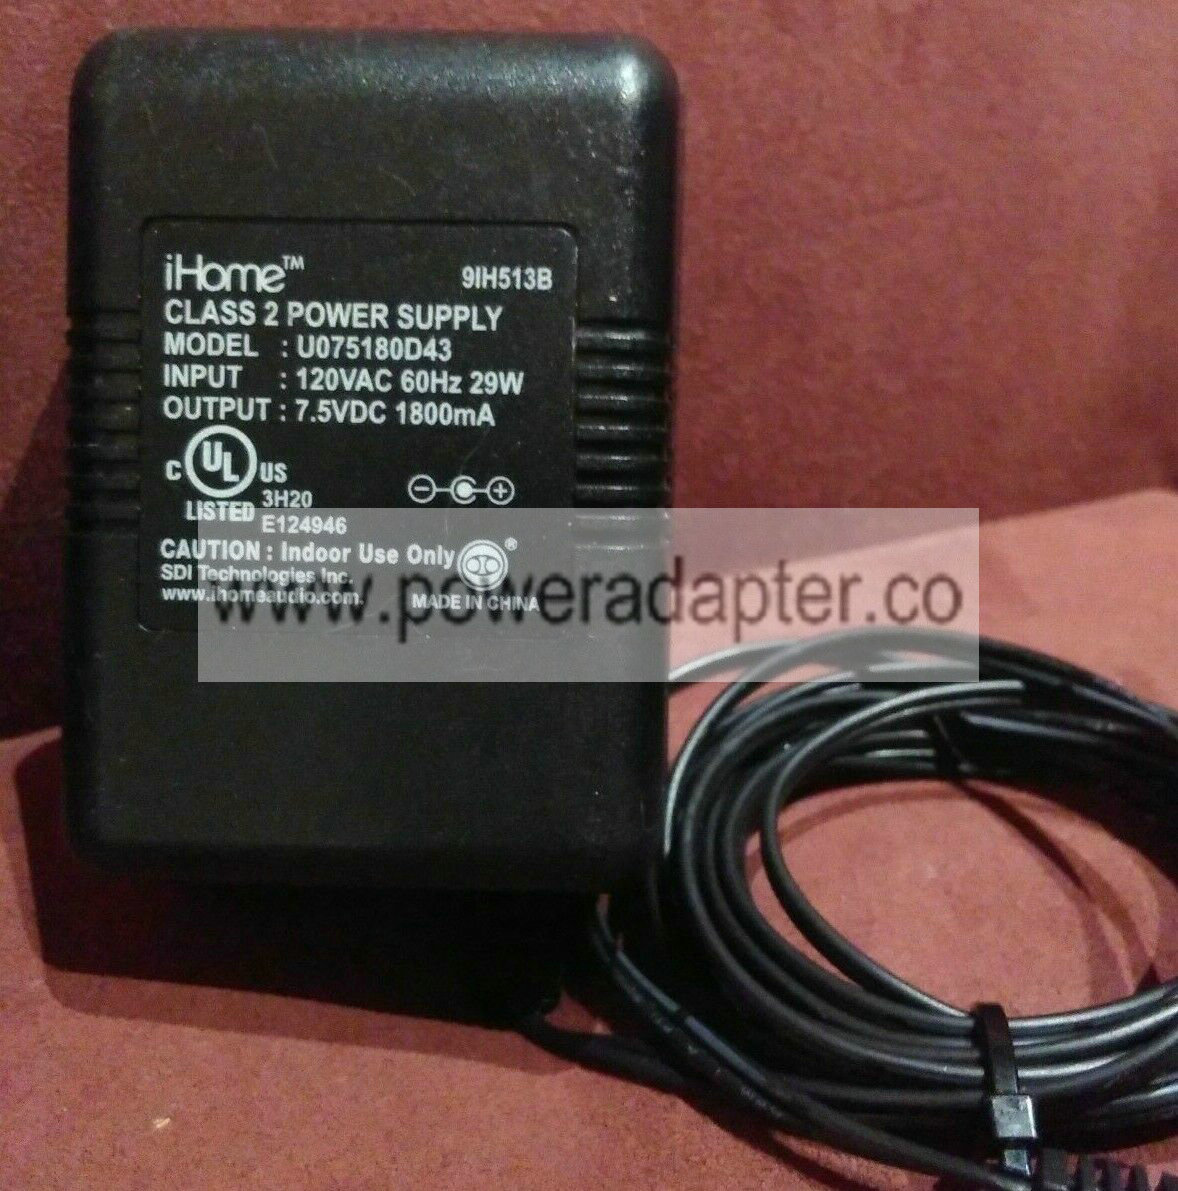 iHome Adapter U075180D43 Class 2Power Supply 7.5VDC 1800mA 91H513B AUTHENTIC NEW This is a Genuine Original iHome U0751